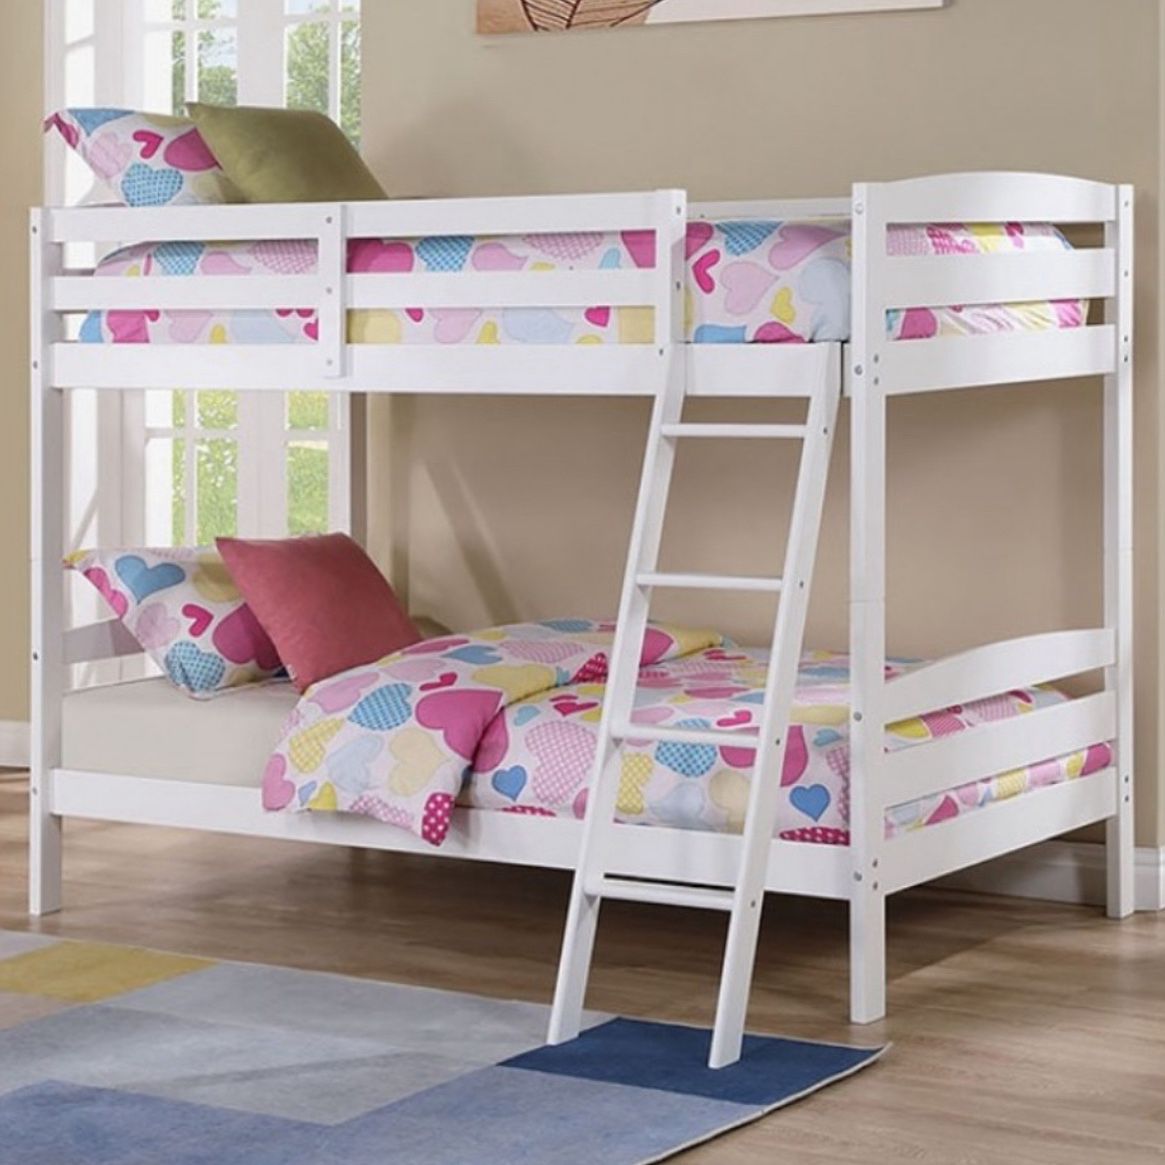 WHITE TWIN/FULL BUNK BED!!✨(mattress is not included)🔥Visit Our Showroom📍Apply Now✅ Delivery Express🚚 